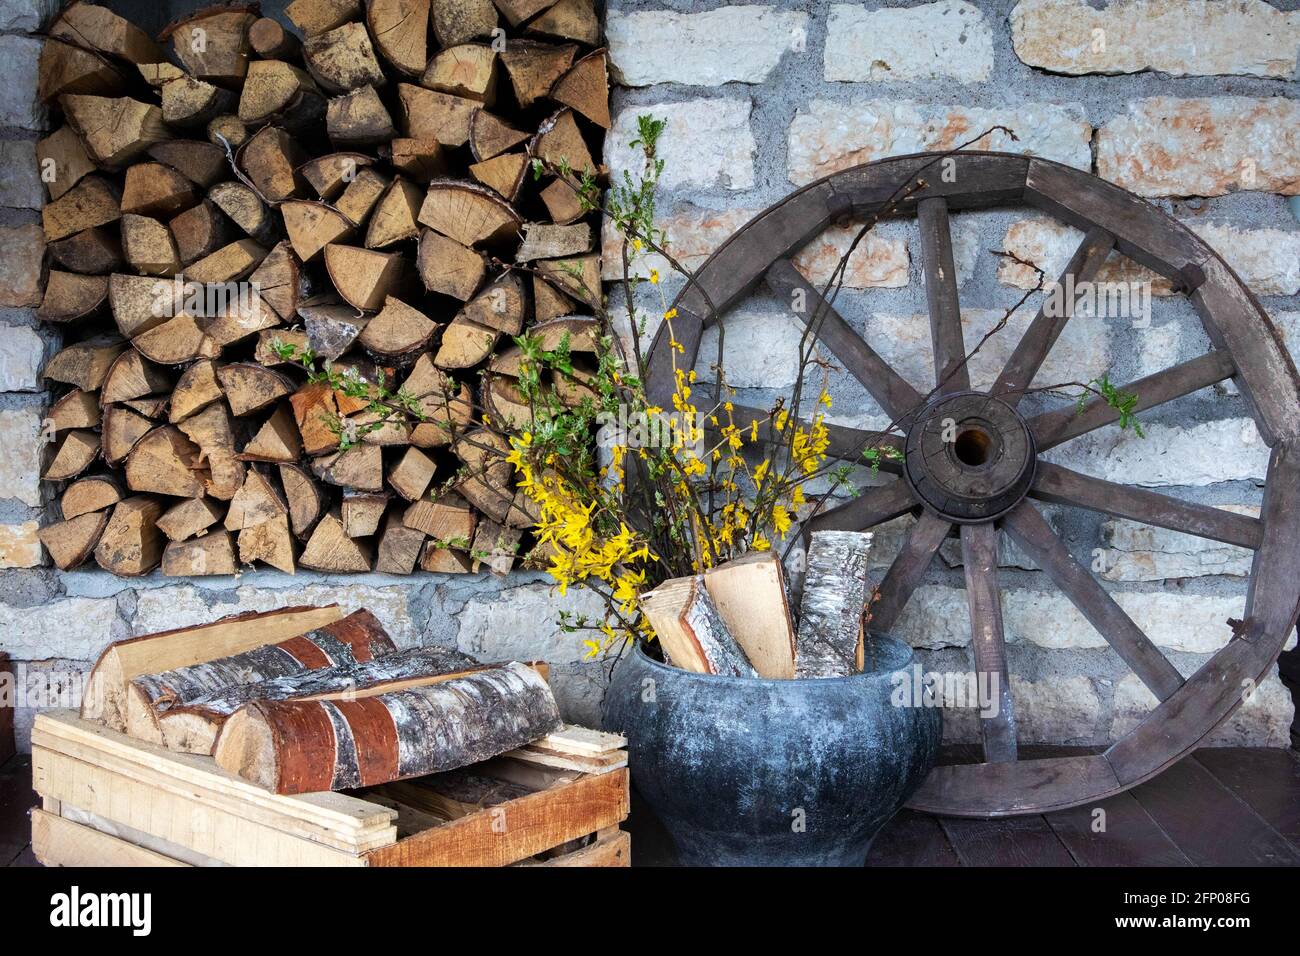 Village accessories, decorative rural scene with old cartwheel, stack of fire woods and old pot with yellow flowers Stock Photo